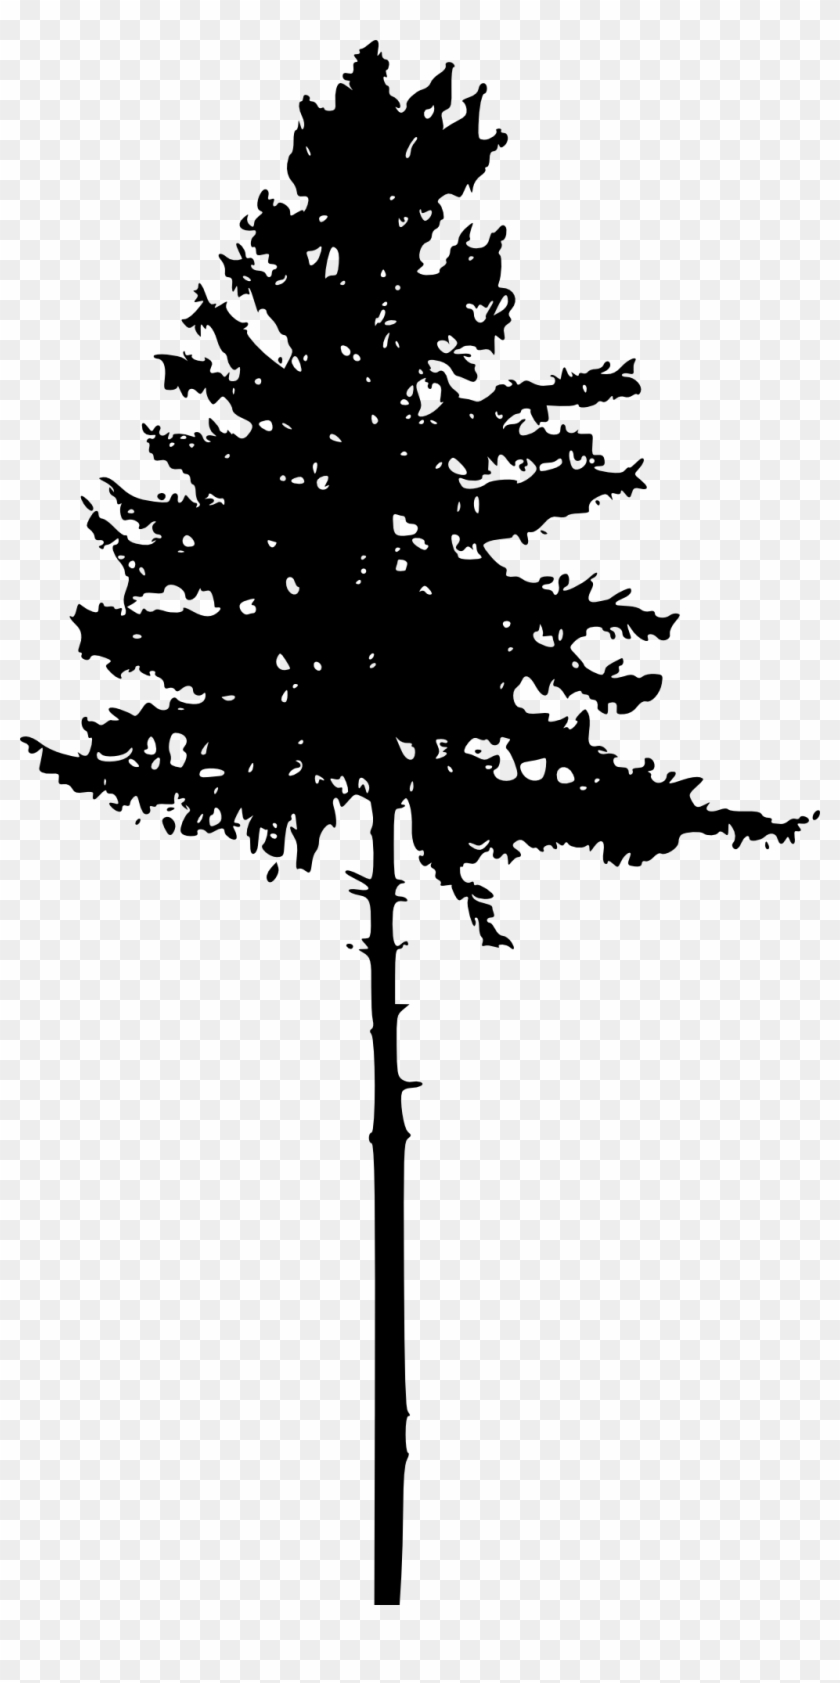 45 Tree Silhouettes Png Transparent Background - Pine Tree Silhouette Png #418805